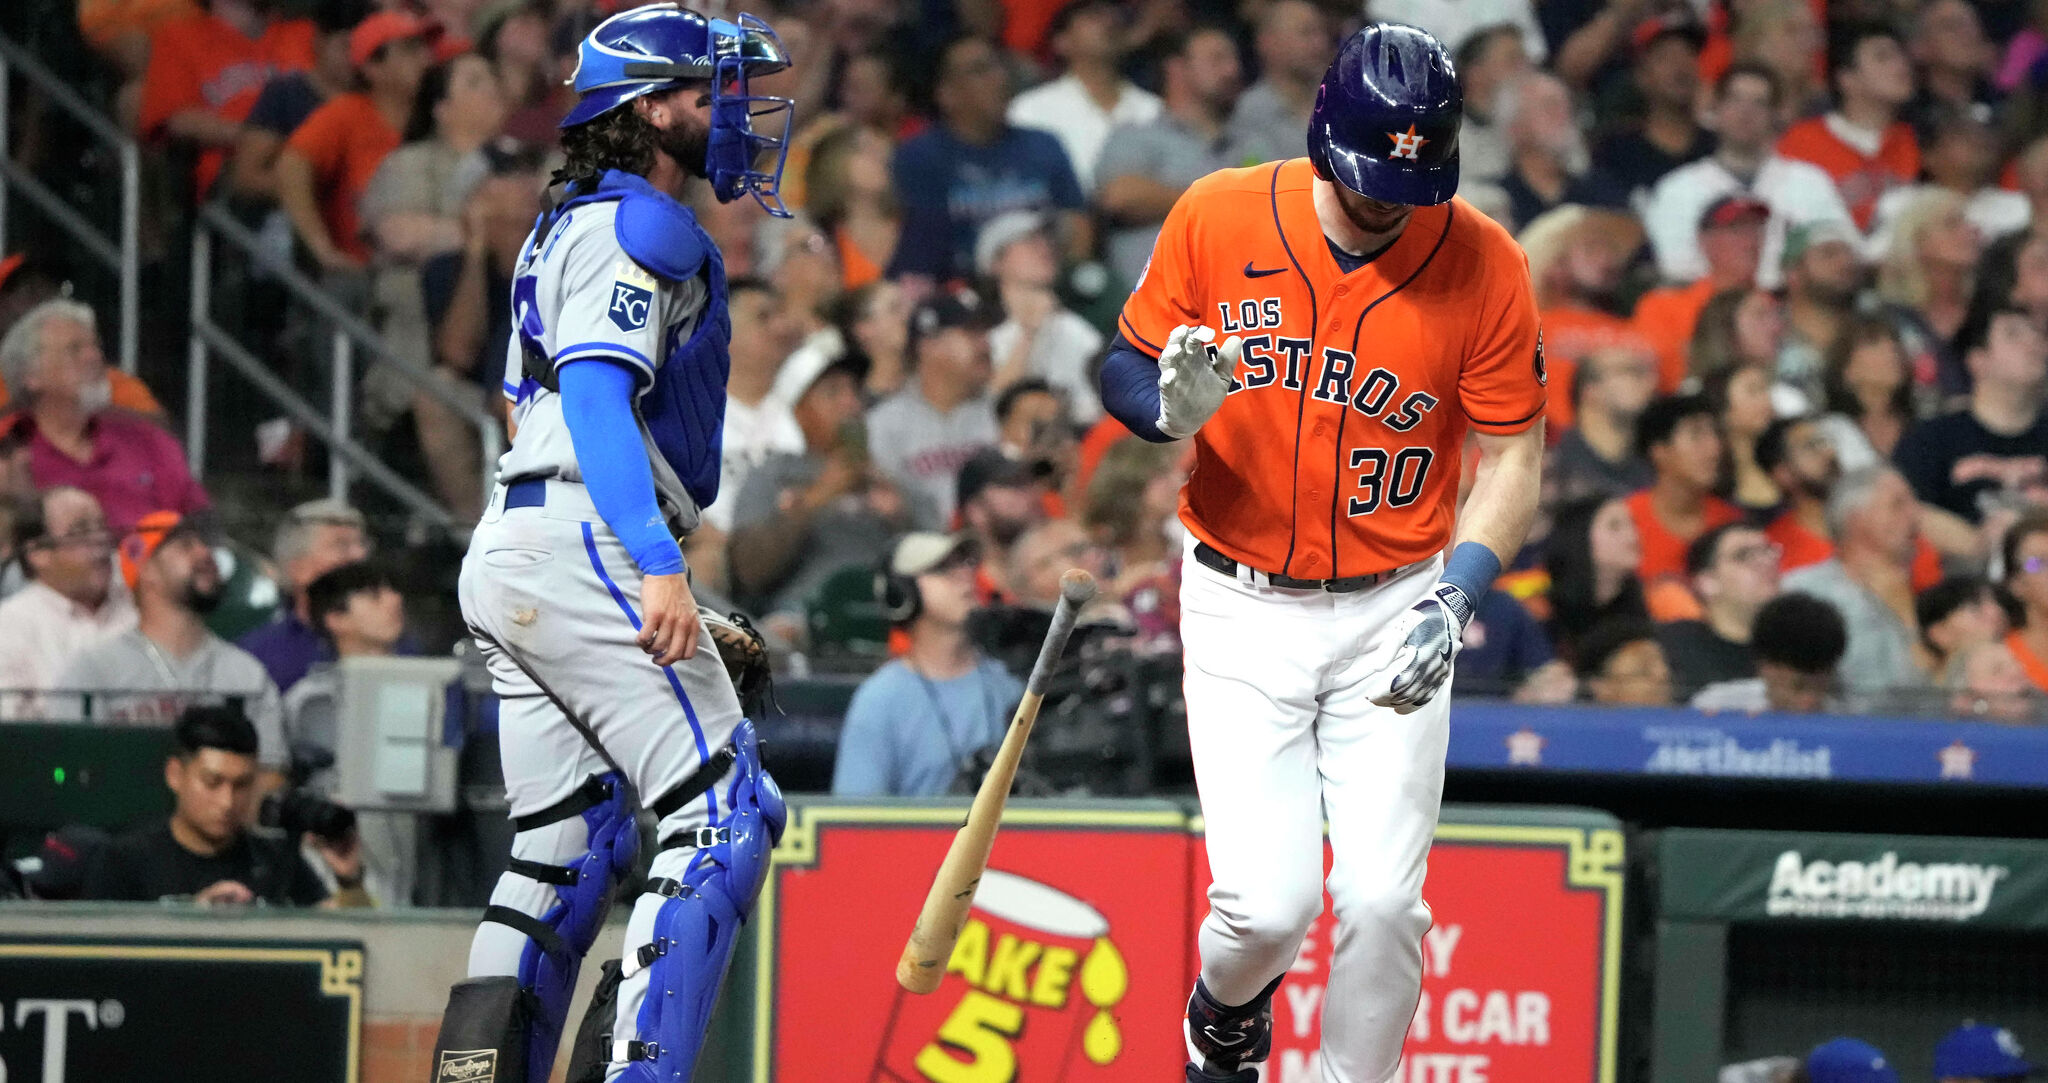 Garcia's strong start helps Astros cool off Royals, 4-0